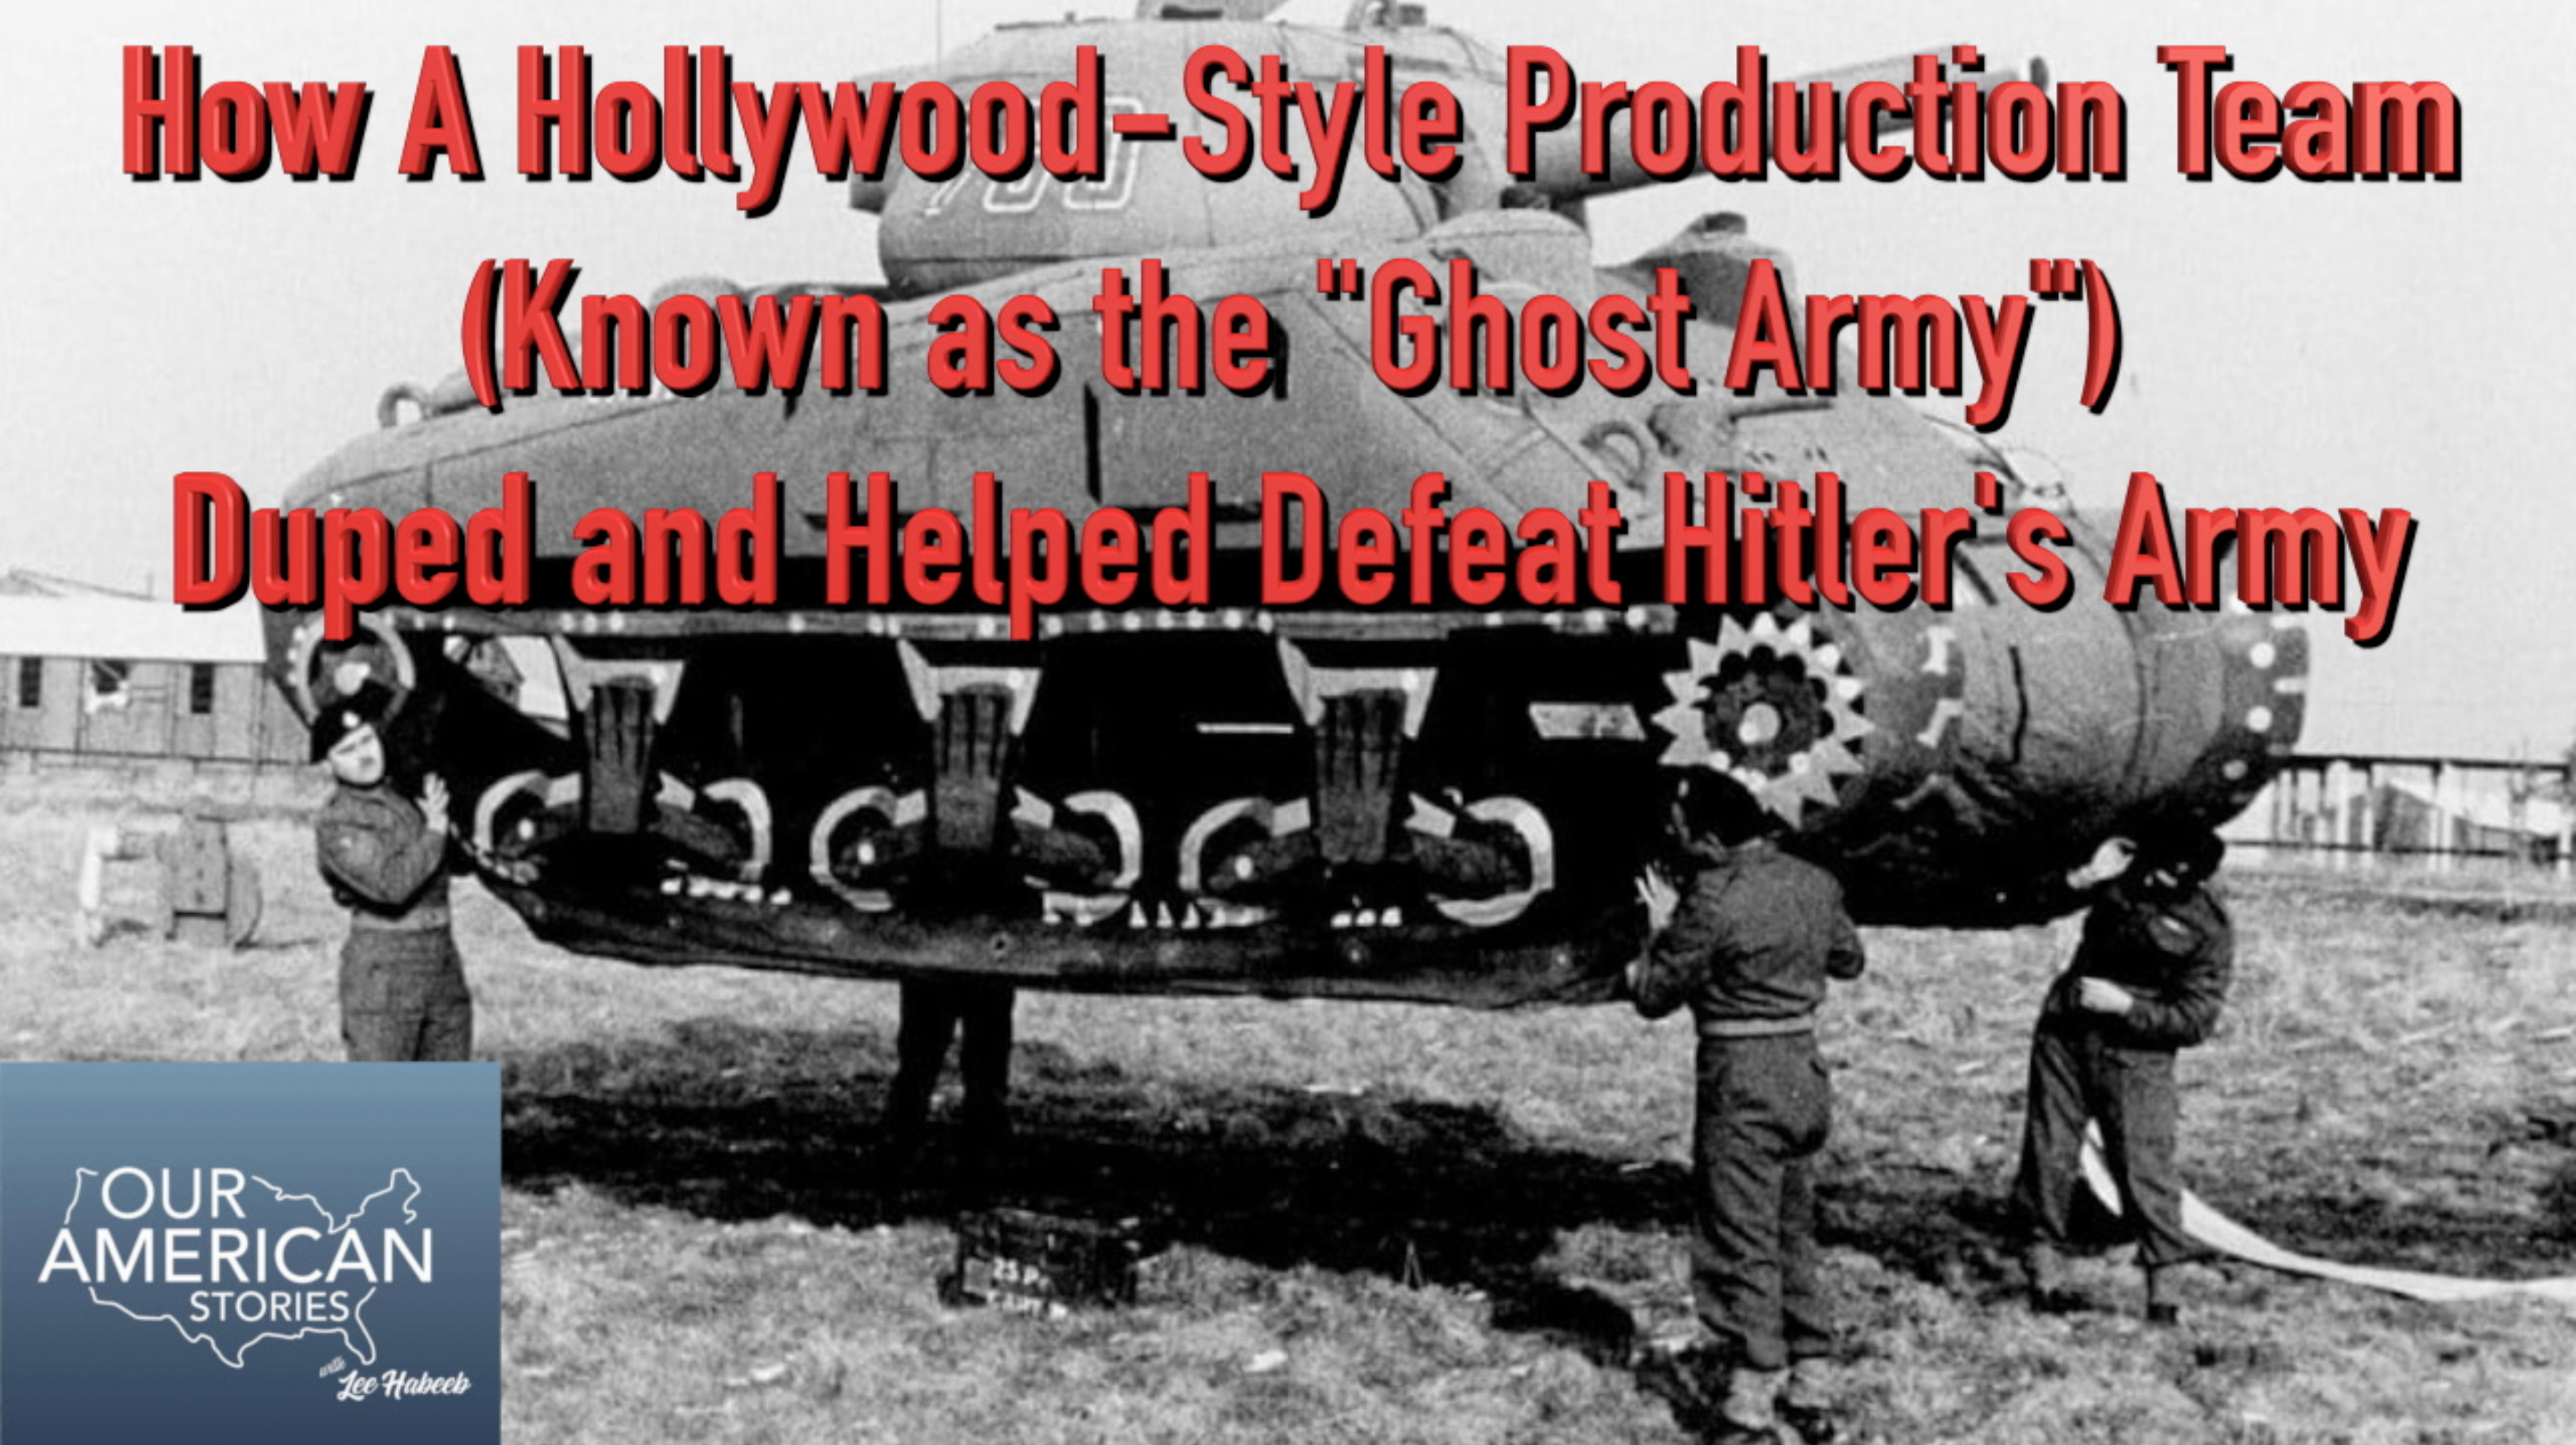 How A Hollywood-Style Production Team (Known as the 